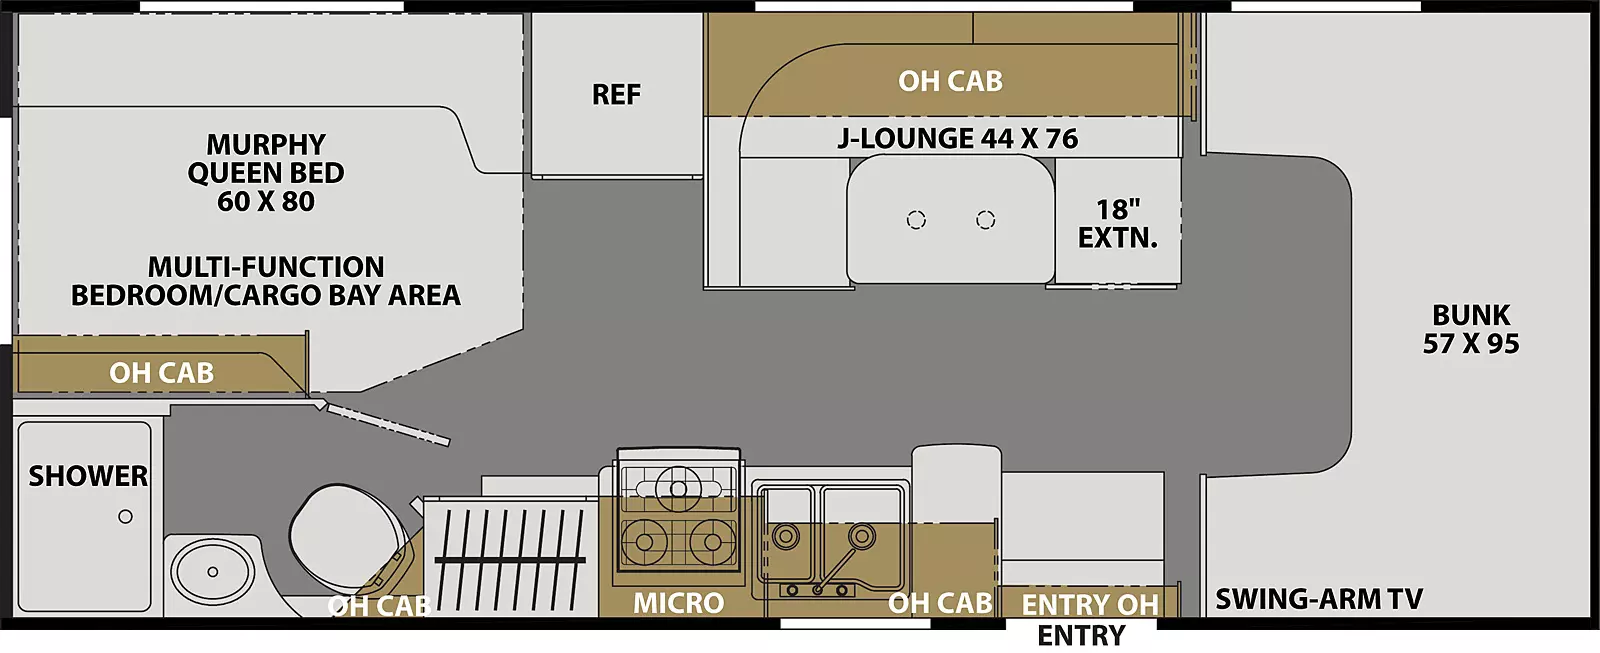 The Freelander 22XG FORD 350  has 0 slideouts. Interior layout from front to back; front 57 inch by 95 inch bunk with swing arm TV; door side kitchen with microwave above stovetop, double basin sink and overhead cabinet; off-door side 44 inch by 76 inch J-Lounge with 18 inch extension and overhead cabinets and refrigerator; rear off-door side 60 inch by 80 inch murphy queen bed in multi-function bedroom/cargo bay area; rear door side bathroom with shower, toilet and sink with overhead cabinets.